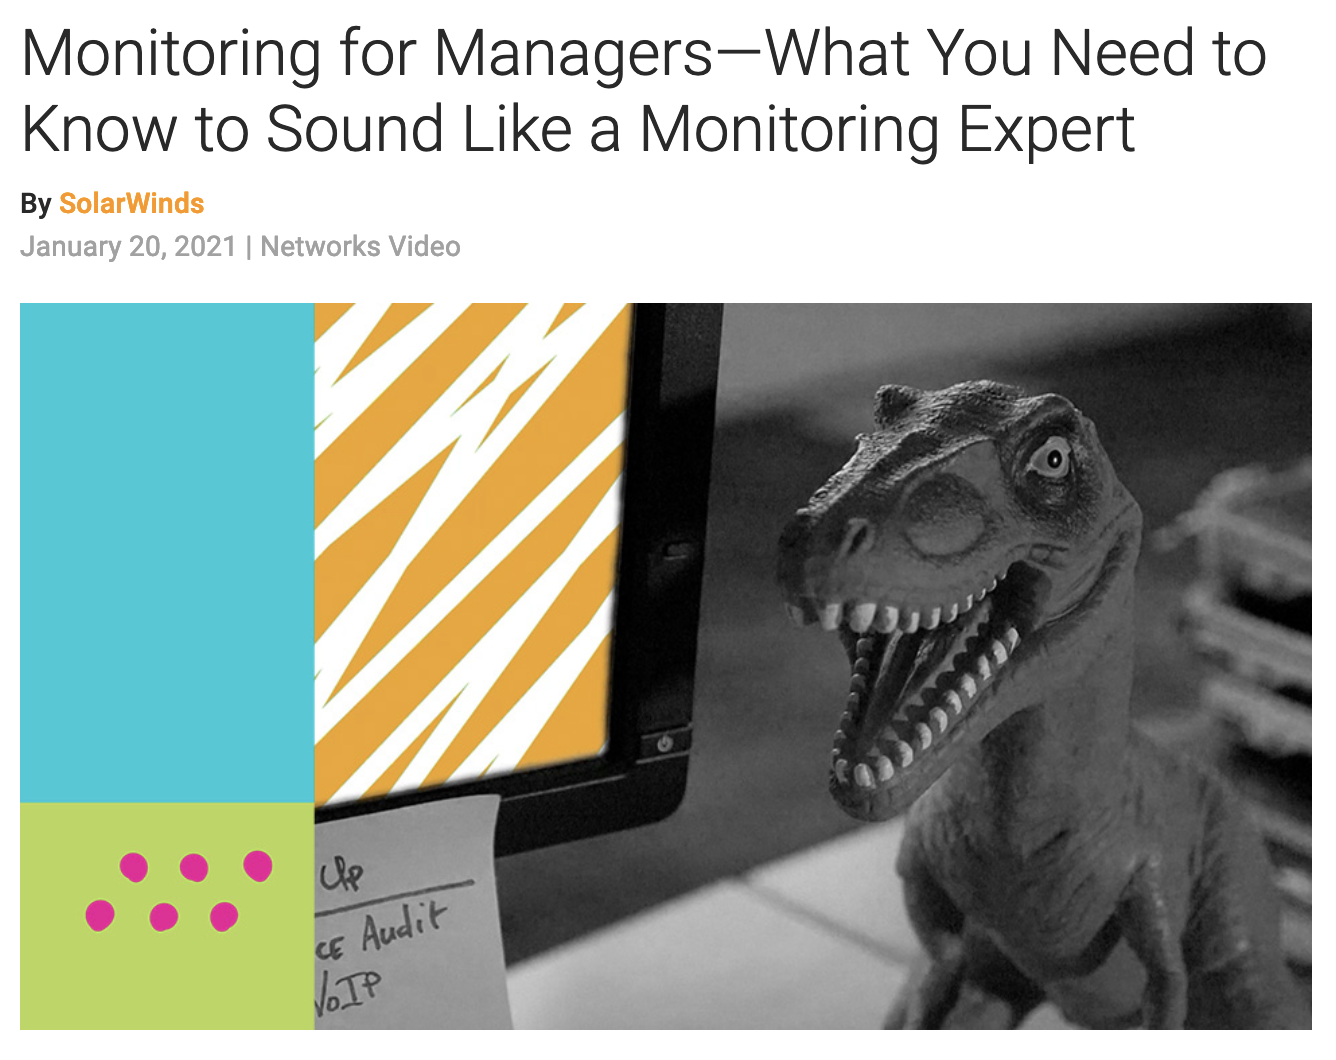 Monitoring for Managers: What You Need to Know to Sound Like a Monitoring Expert